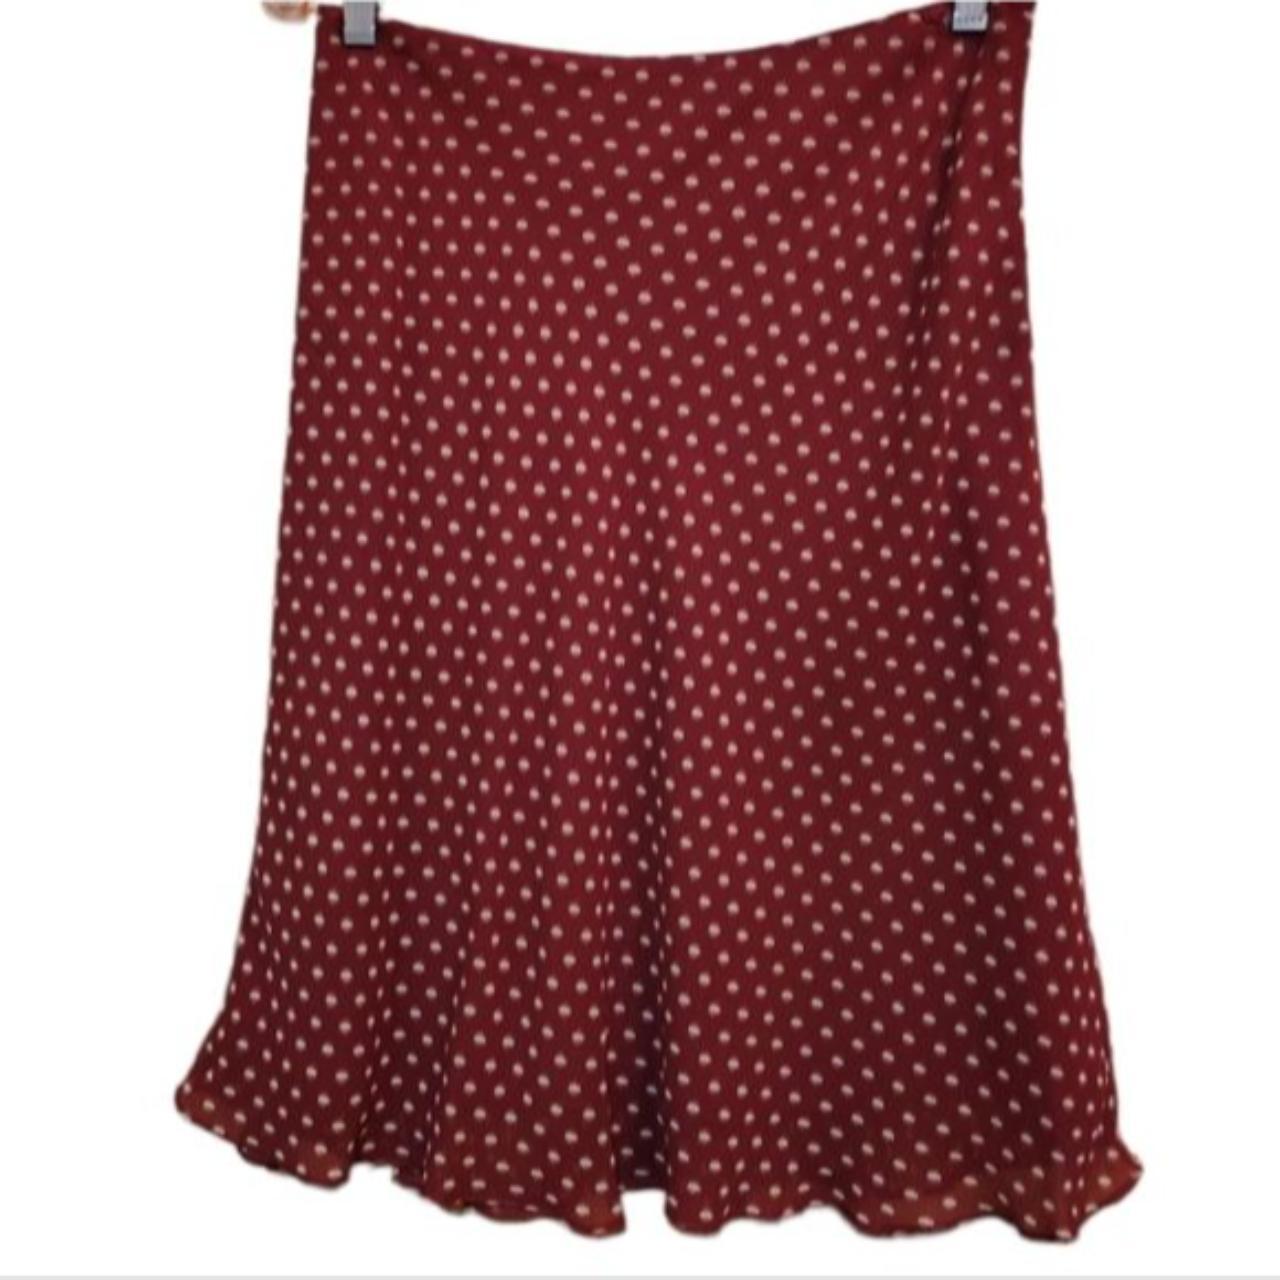 Ann Taylor Women's Red and Tan Skirt (2)